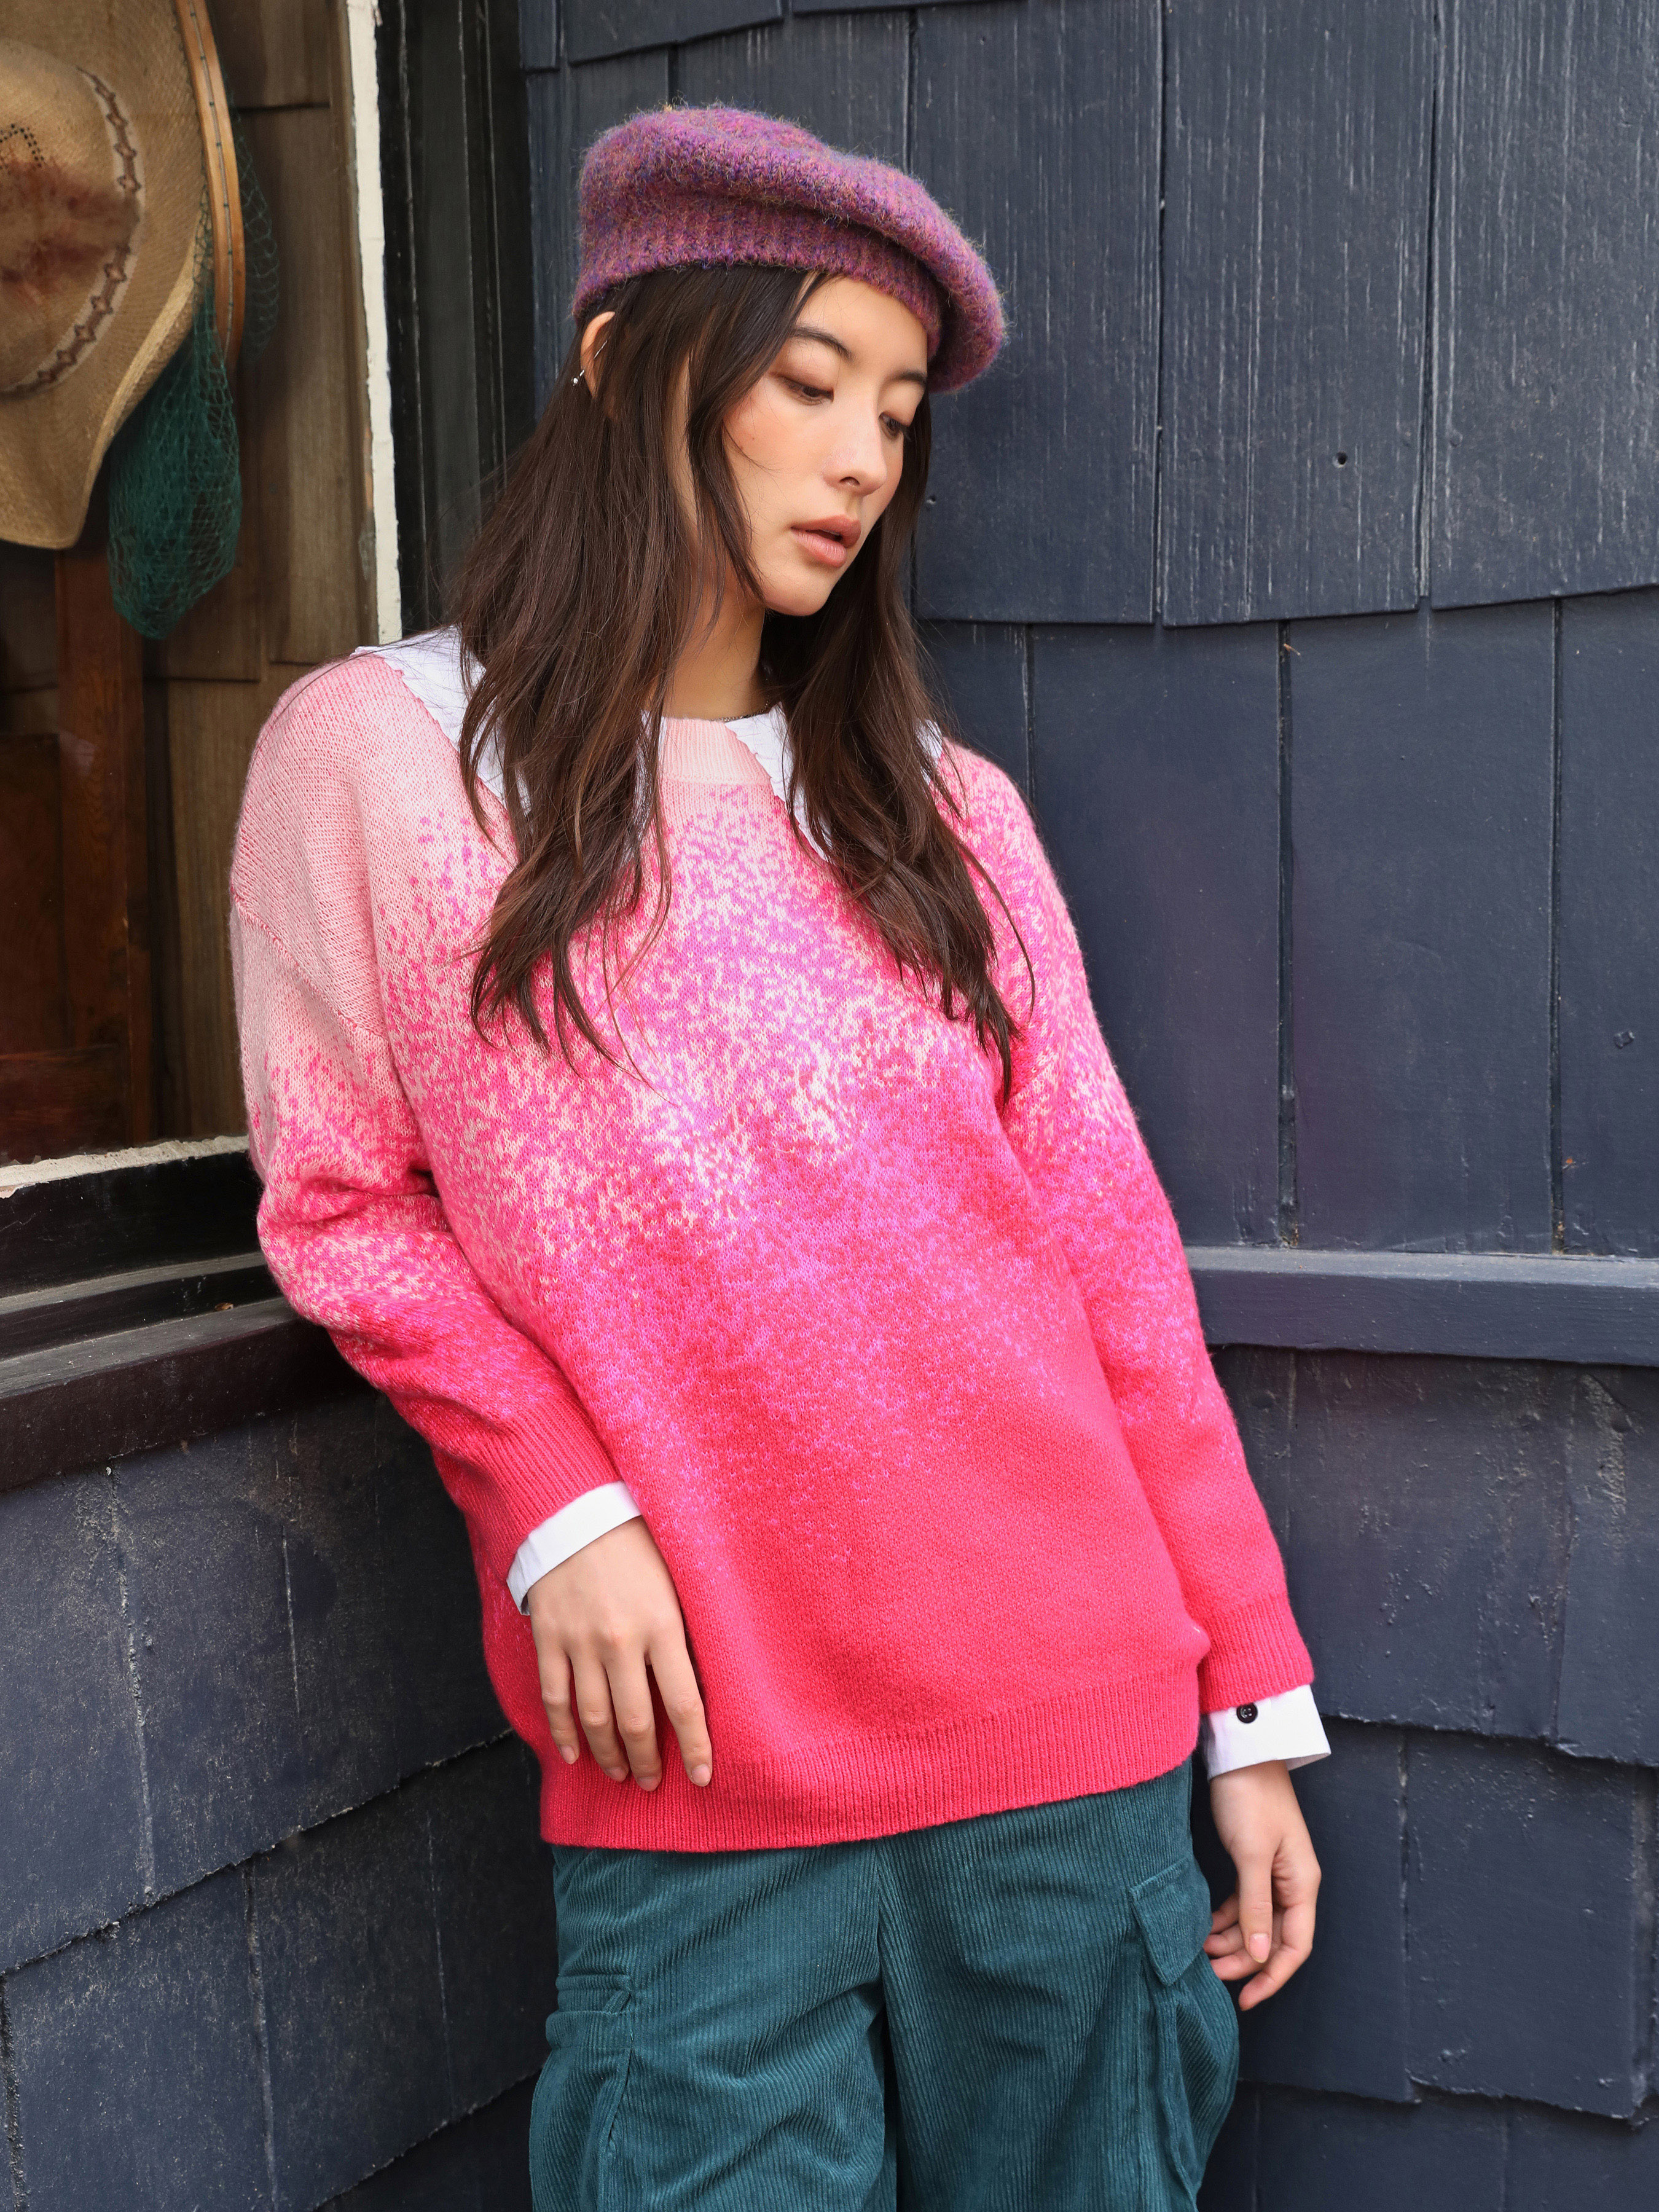 Unisex Gradient Oversized Knitted Sweater For Daily Casual